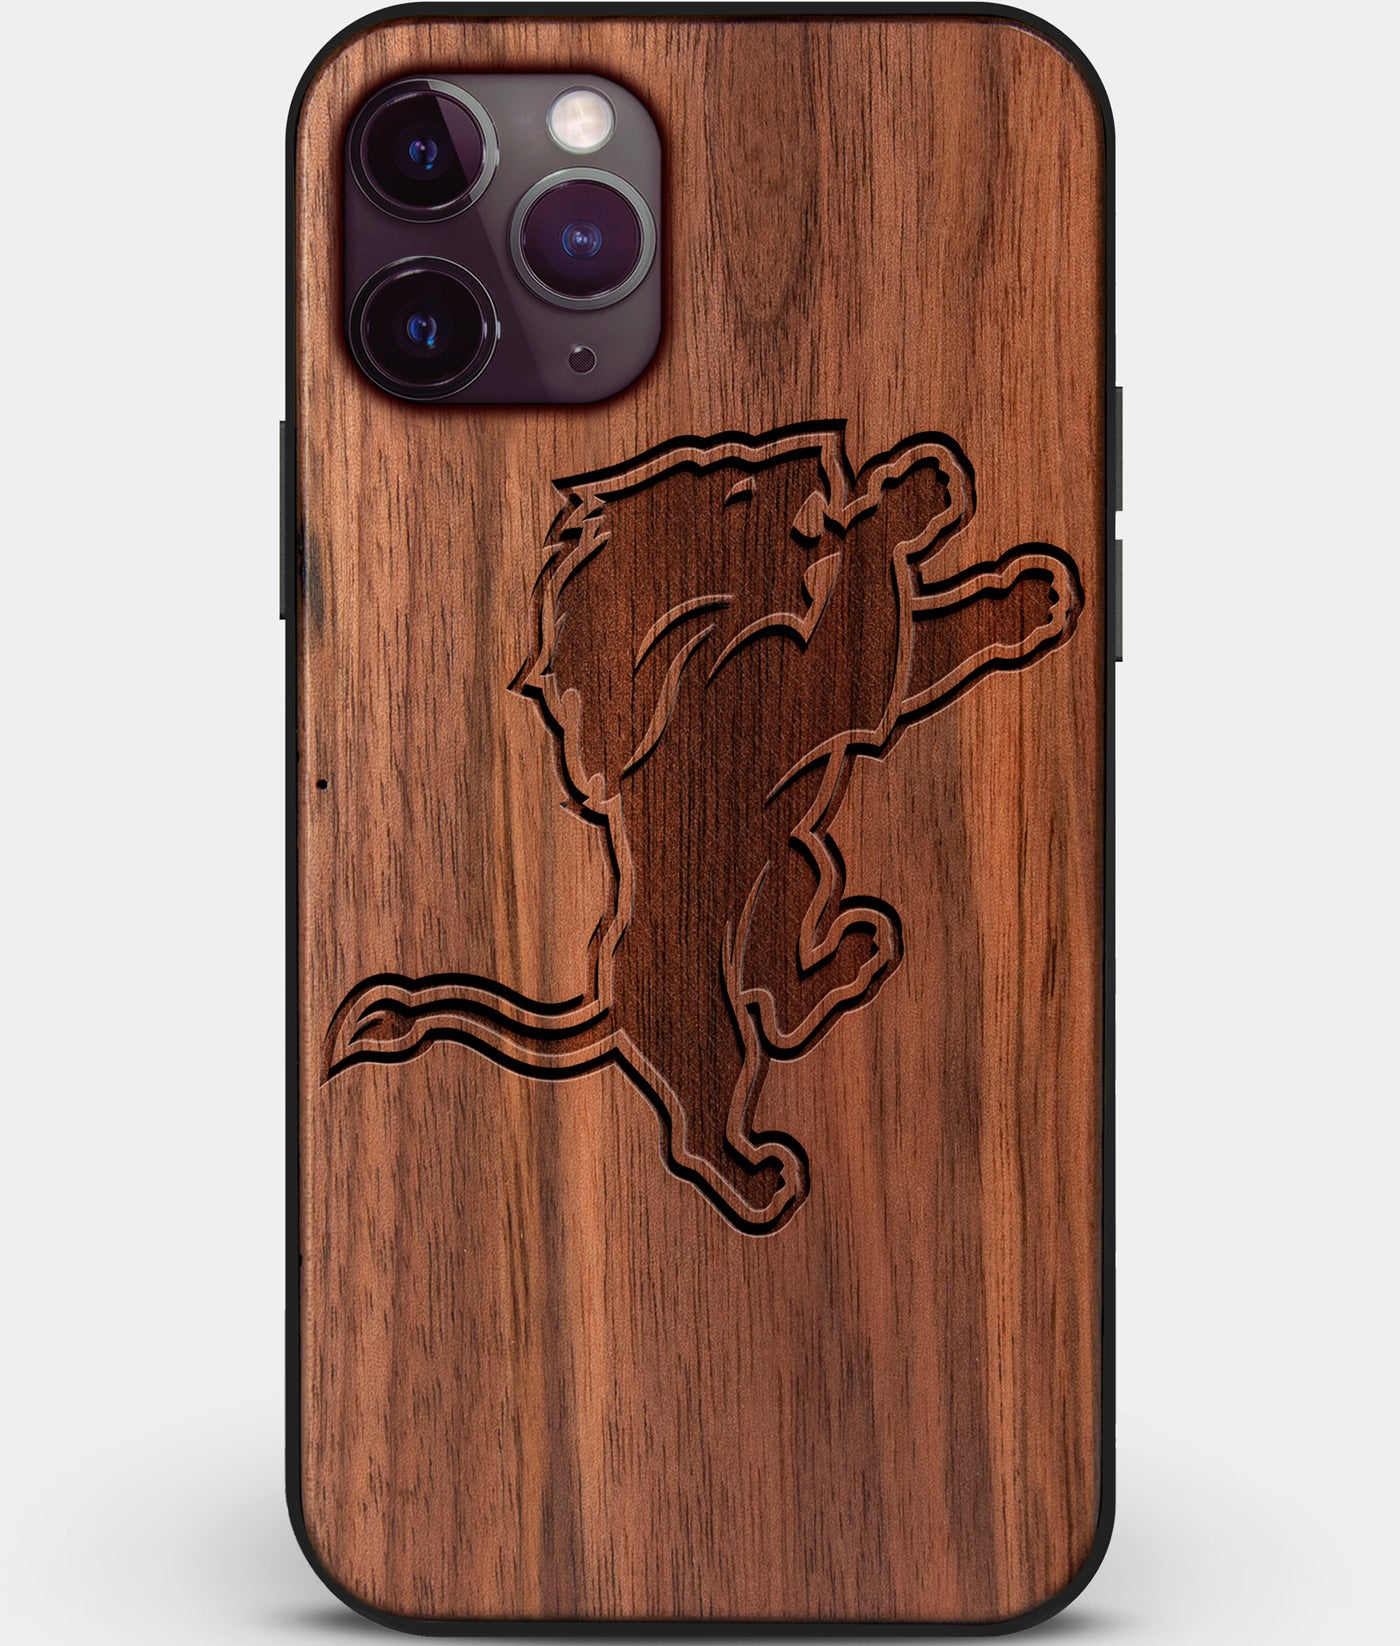 Custom Carved Wood Detroit Lions iPhone 11 Pro Max Case | Personalized Walnut Wood Detroit Lions Cover, Birthday Gift, Gifts For Him, Monogrammed Gift For Fan | by Engraved In Nature